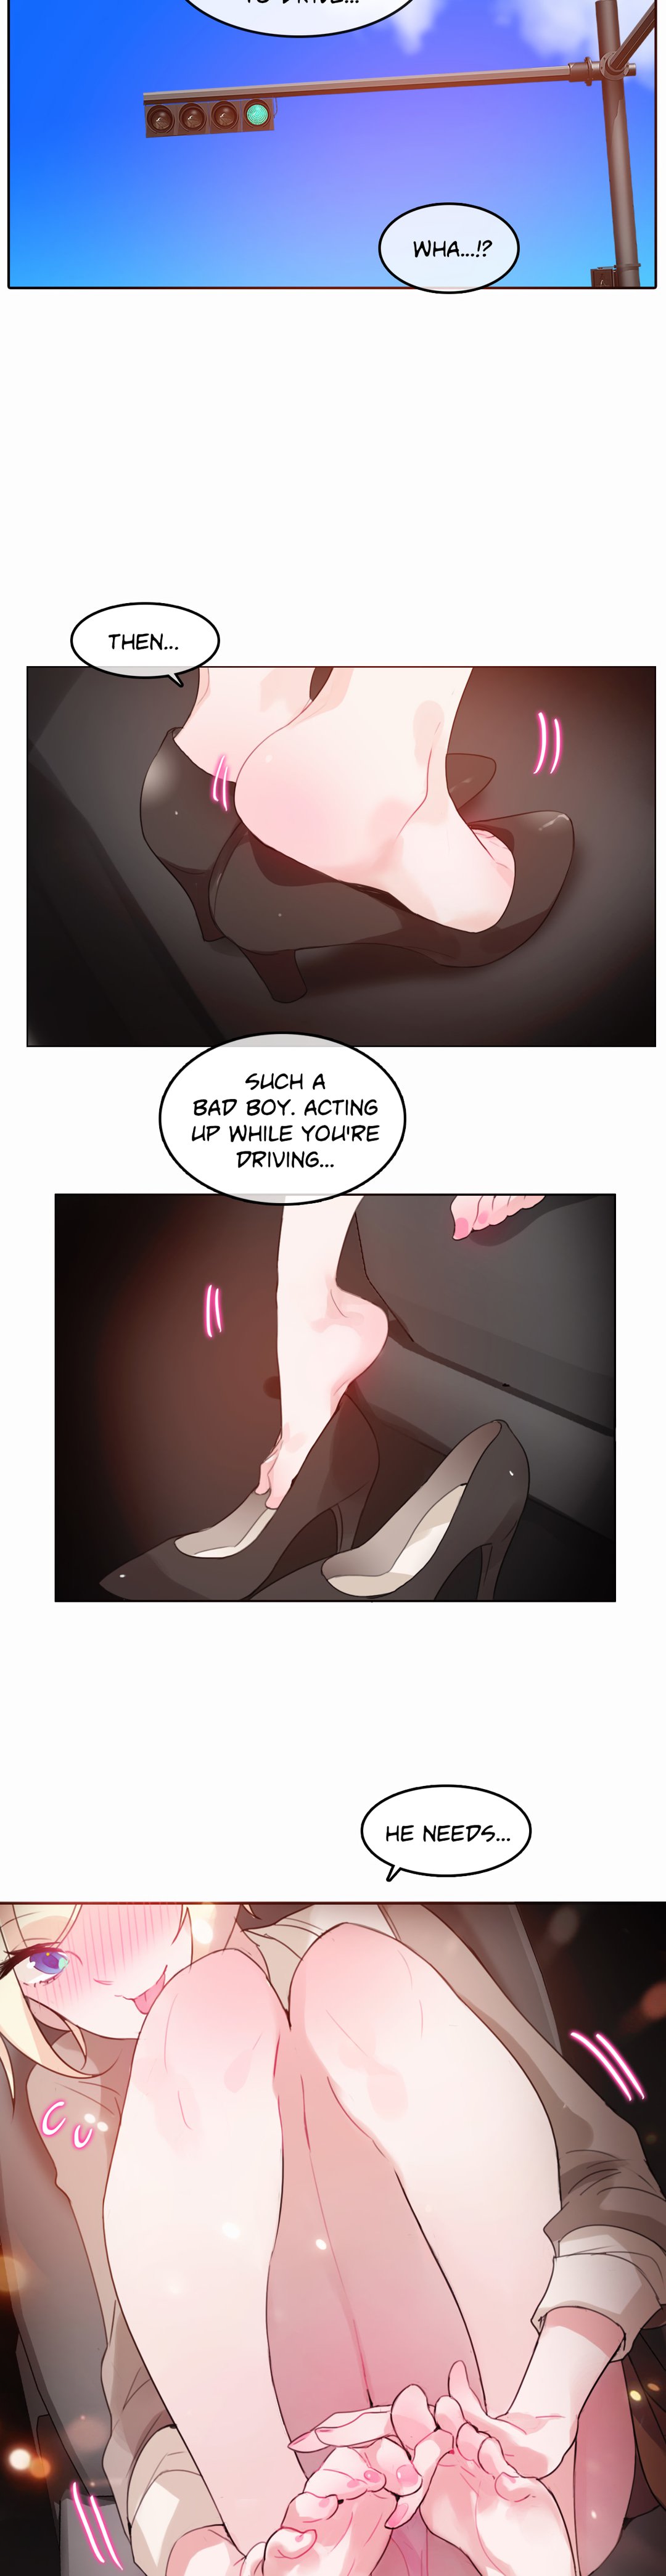 A Pervert's Daily Life - 19 page 4